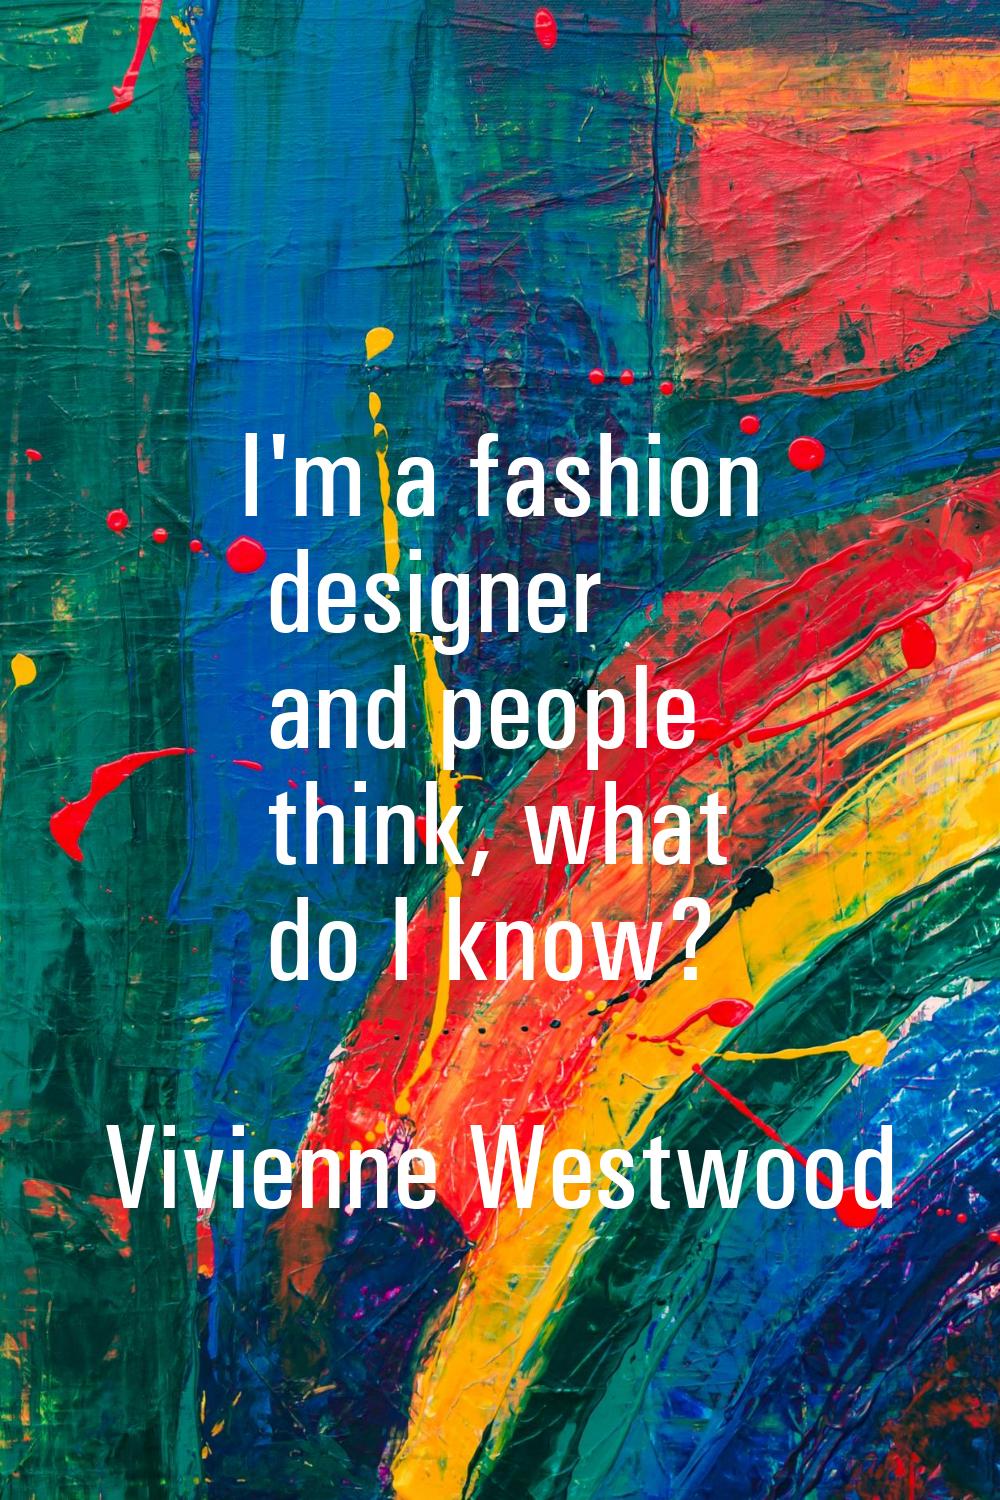 I'm a fashion designer and people think, what do I know?